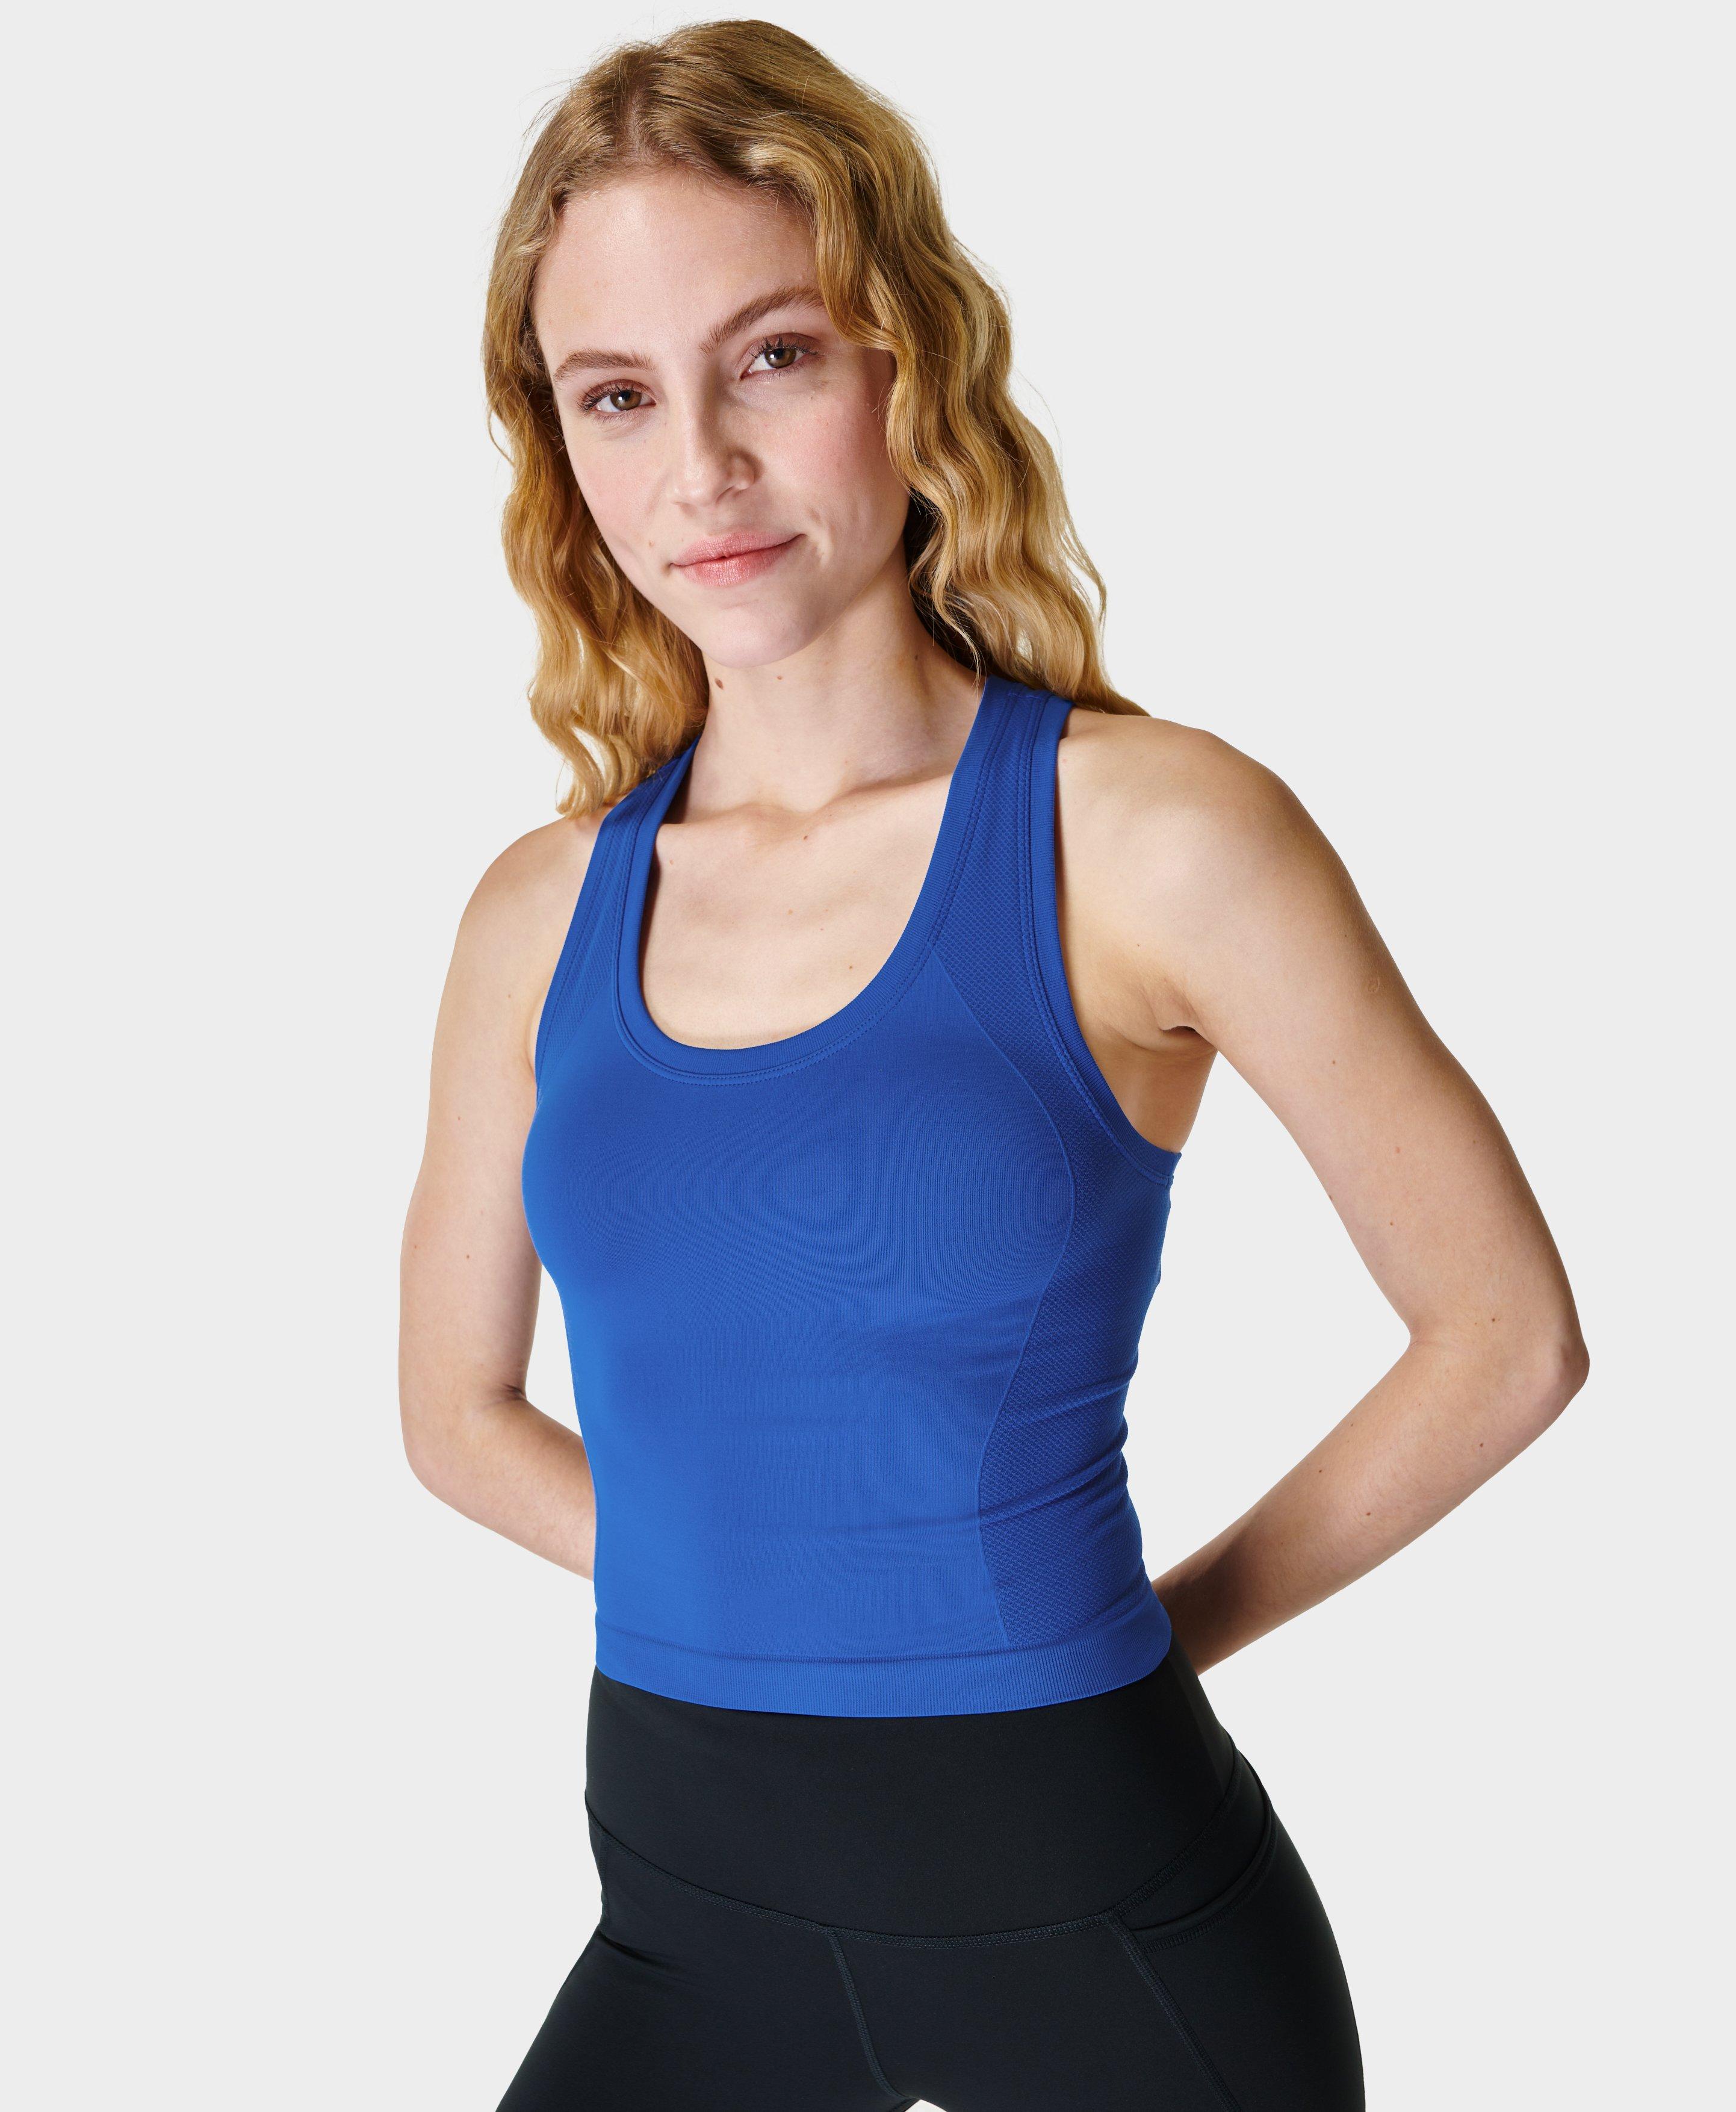 Women's Active Seamless Slim-fit Racerback Tank Top with Built in